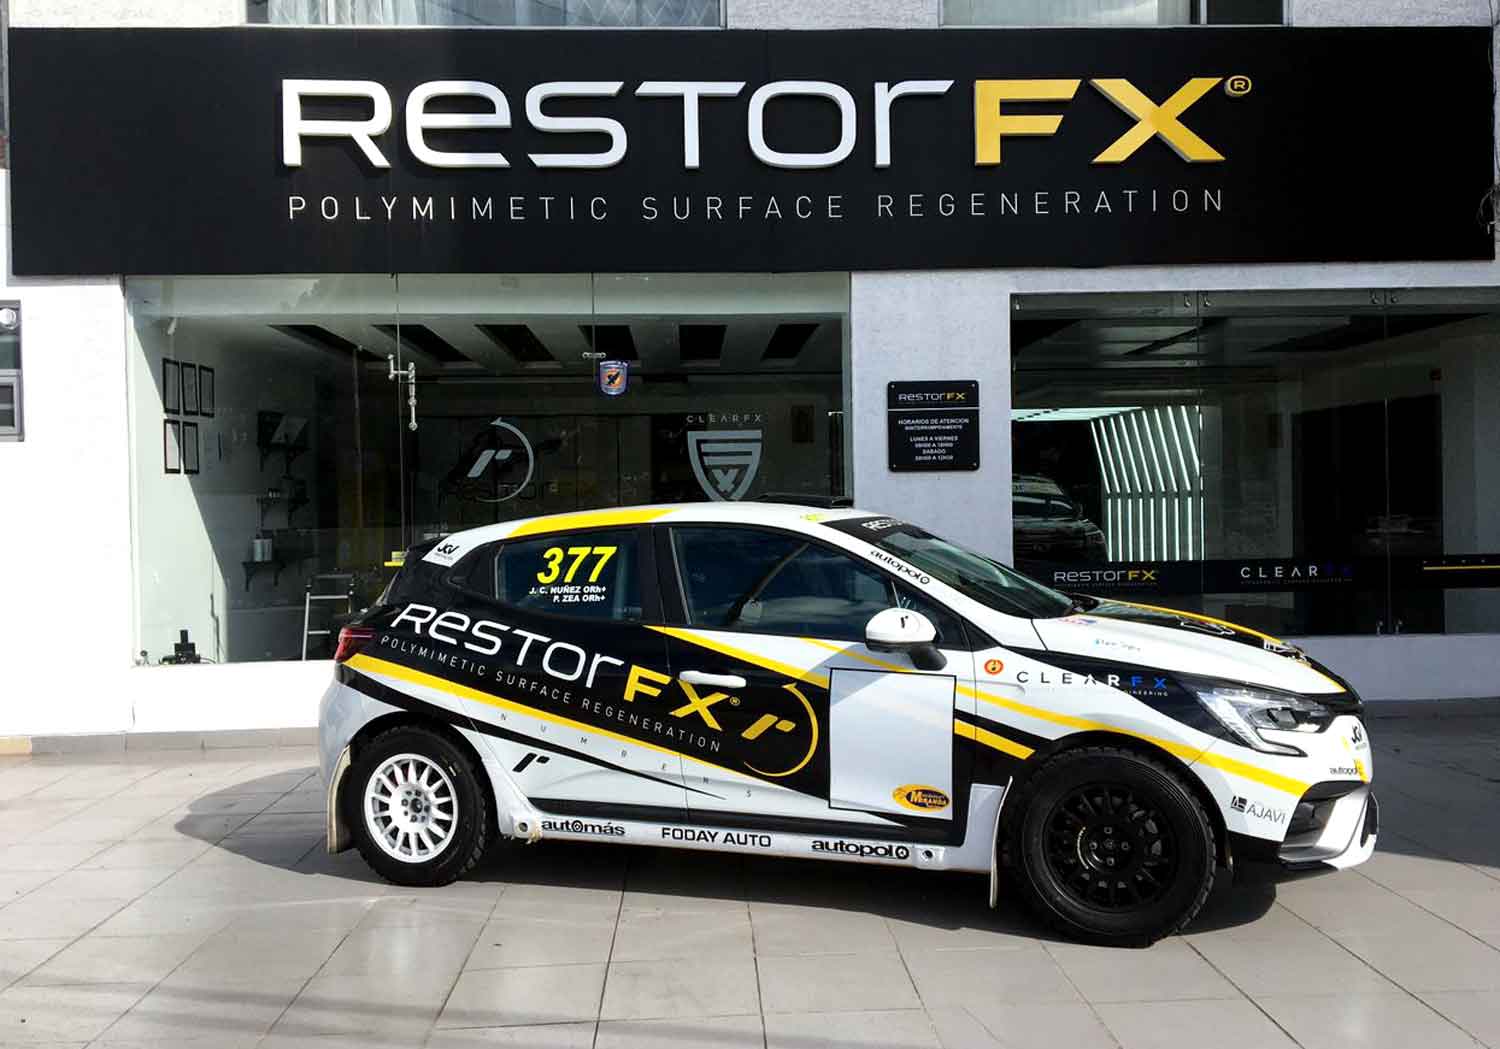 RestorFX branded car parked in from of the RestorFX Ambato storefront